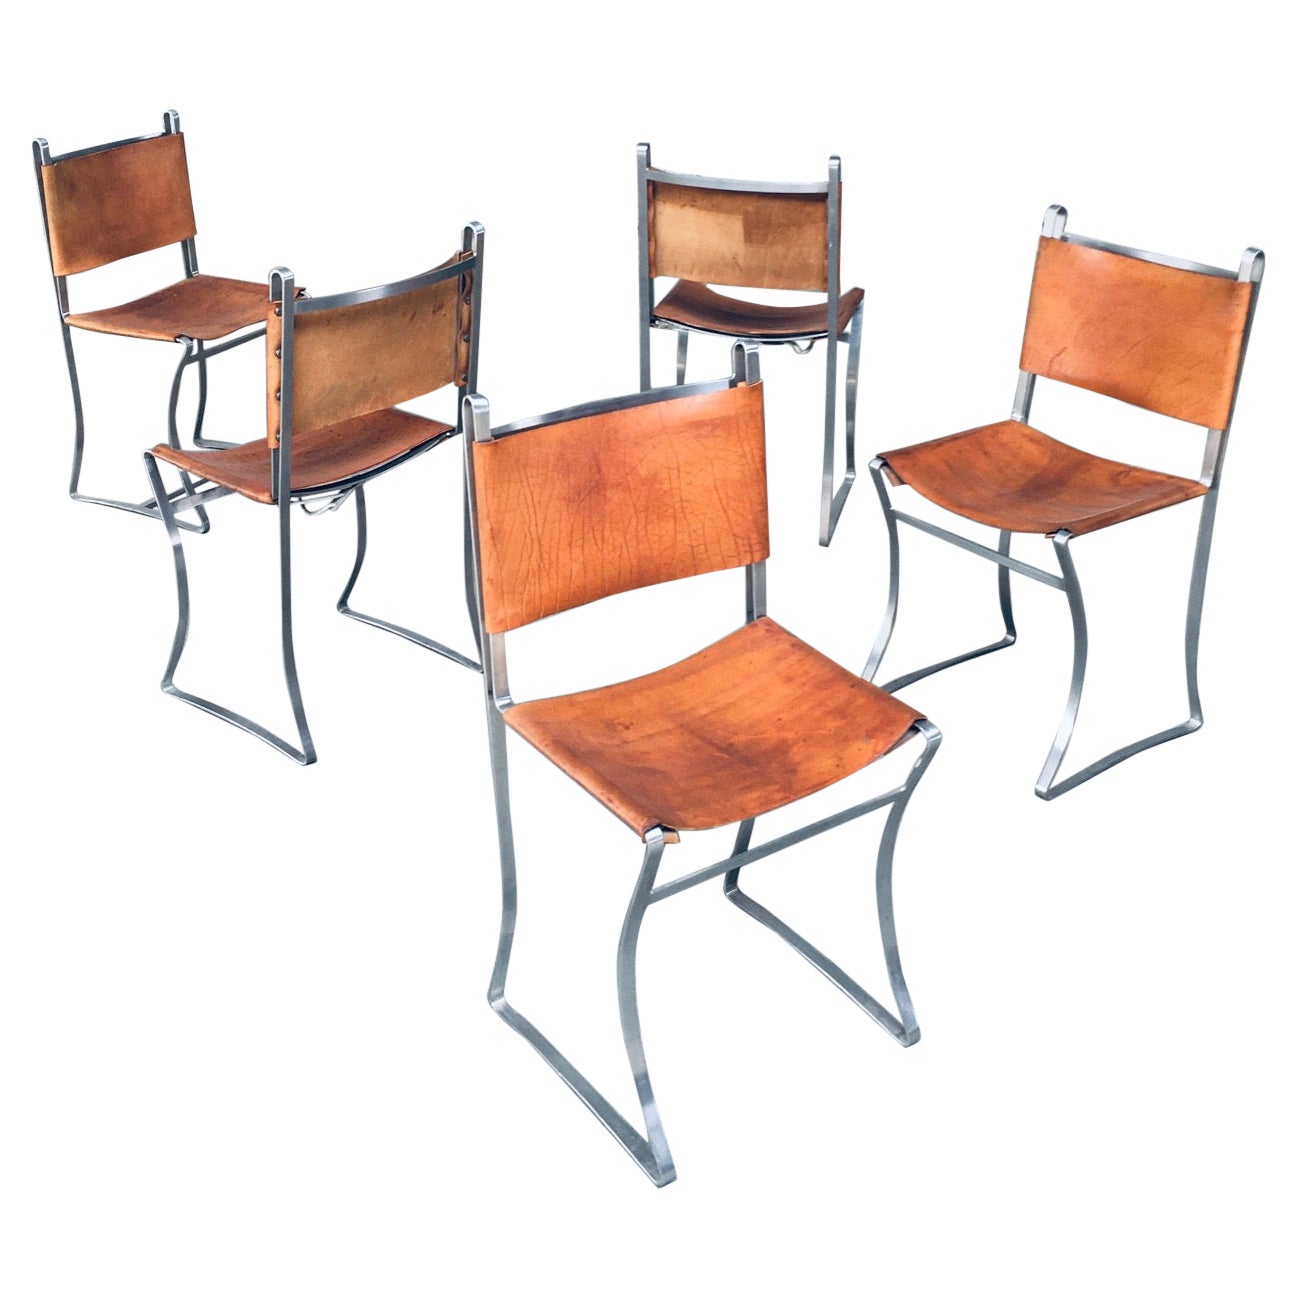 Vintage French Design Leather Dining Chair Set, France, 1970's For Sale